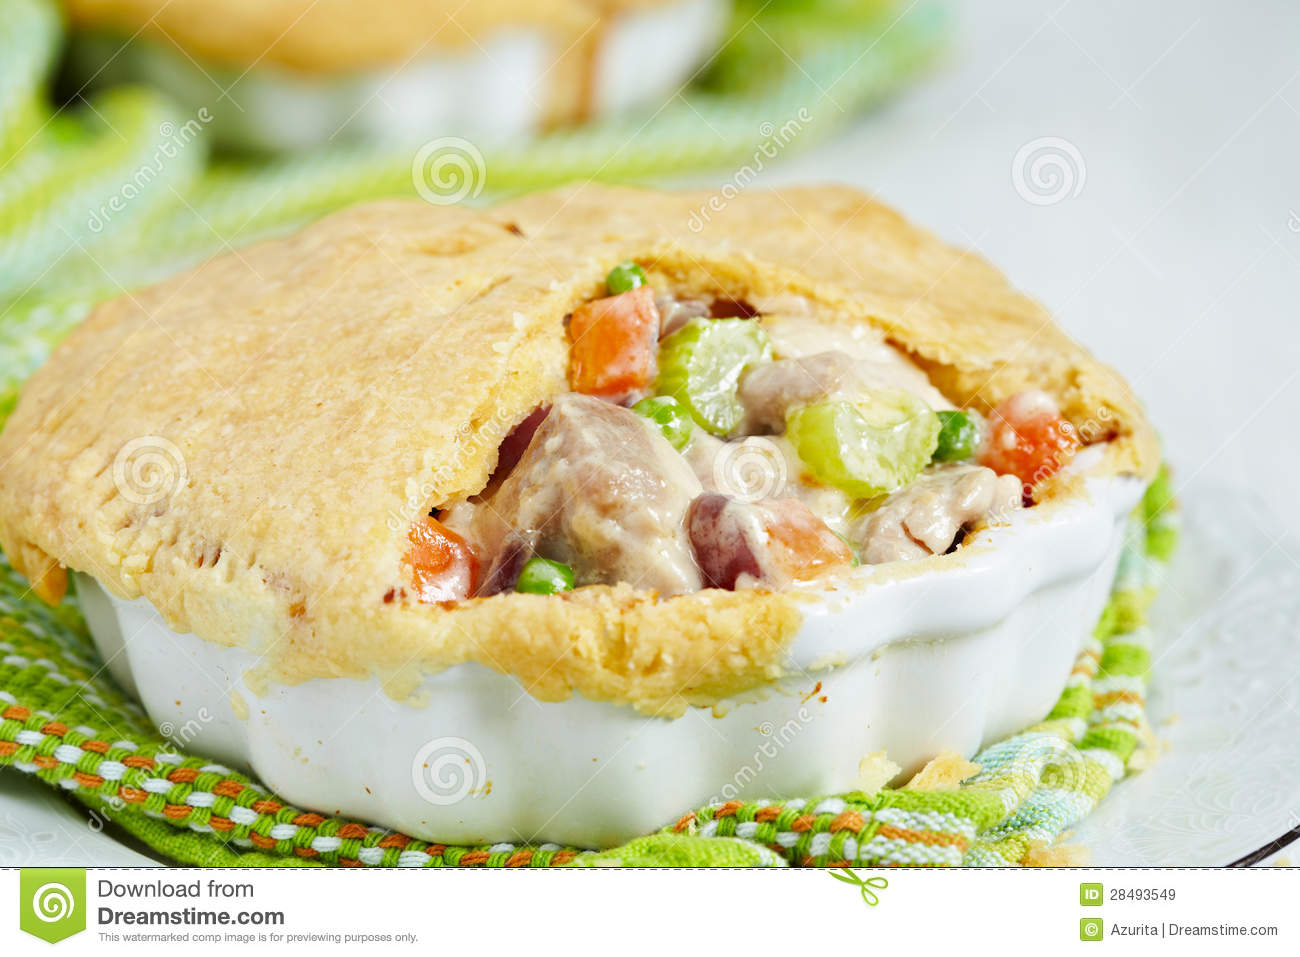 Chicken Pot Pie Royalty Free Stock Images   Image  28493549